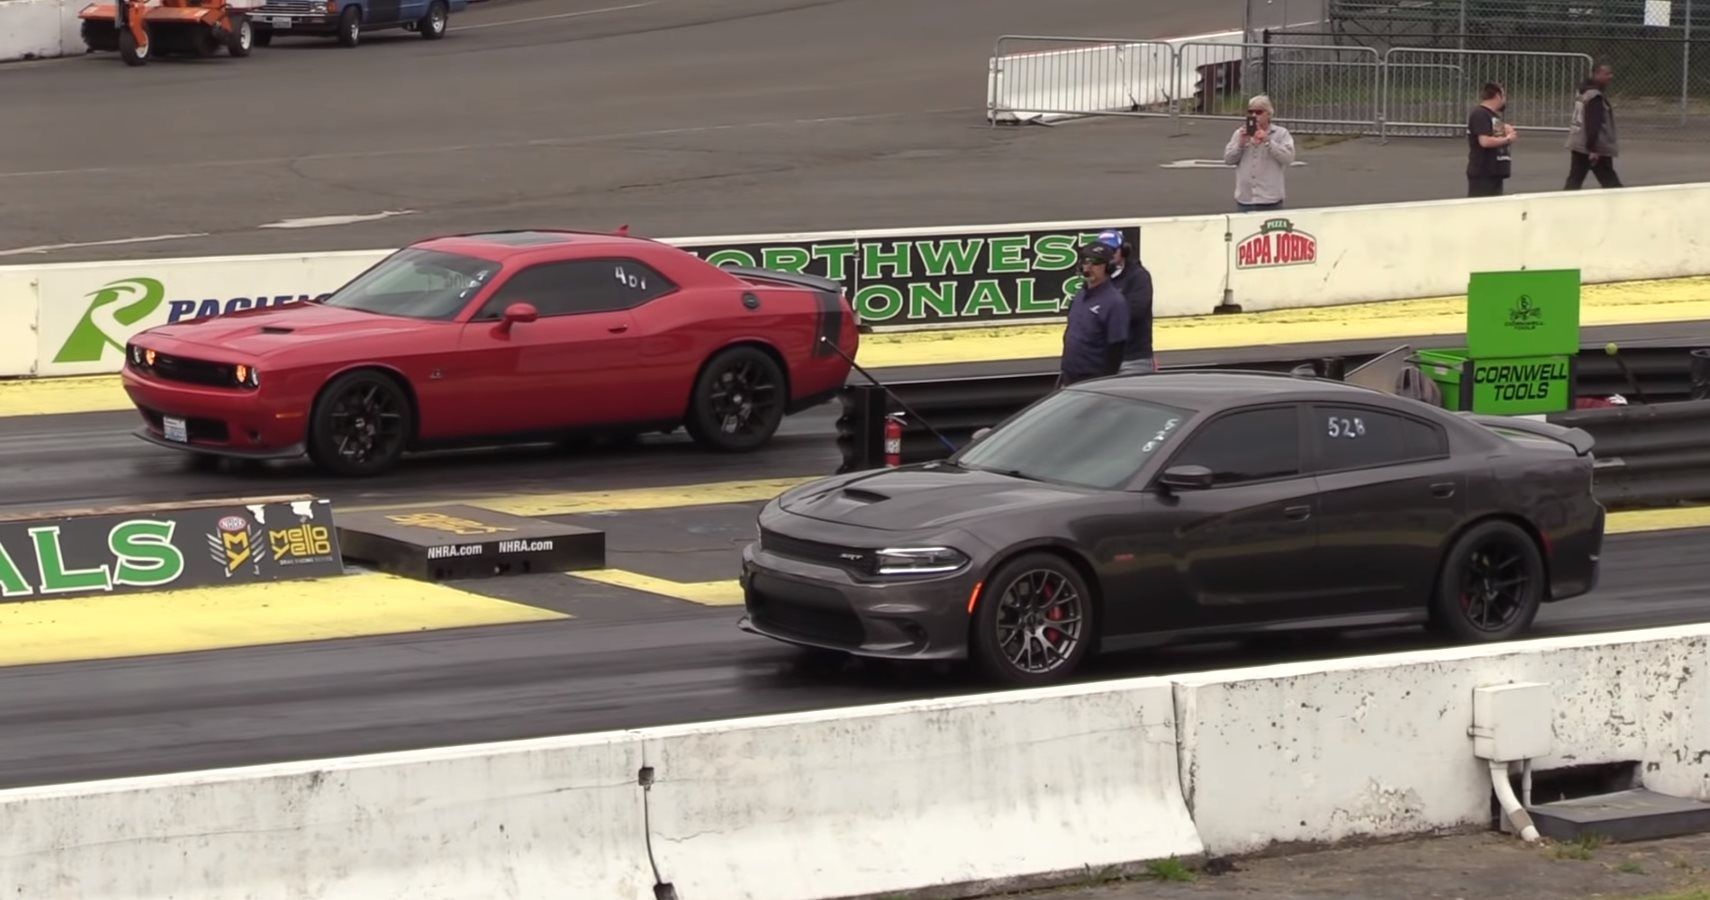 Watch A Dodge Charger Take On A Challenger R/T Scat Pack On The Drag Strip